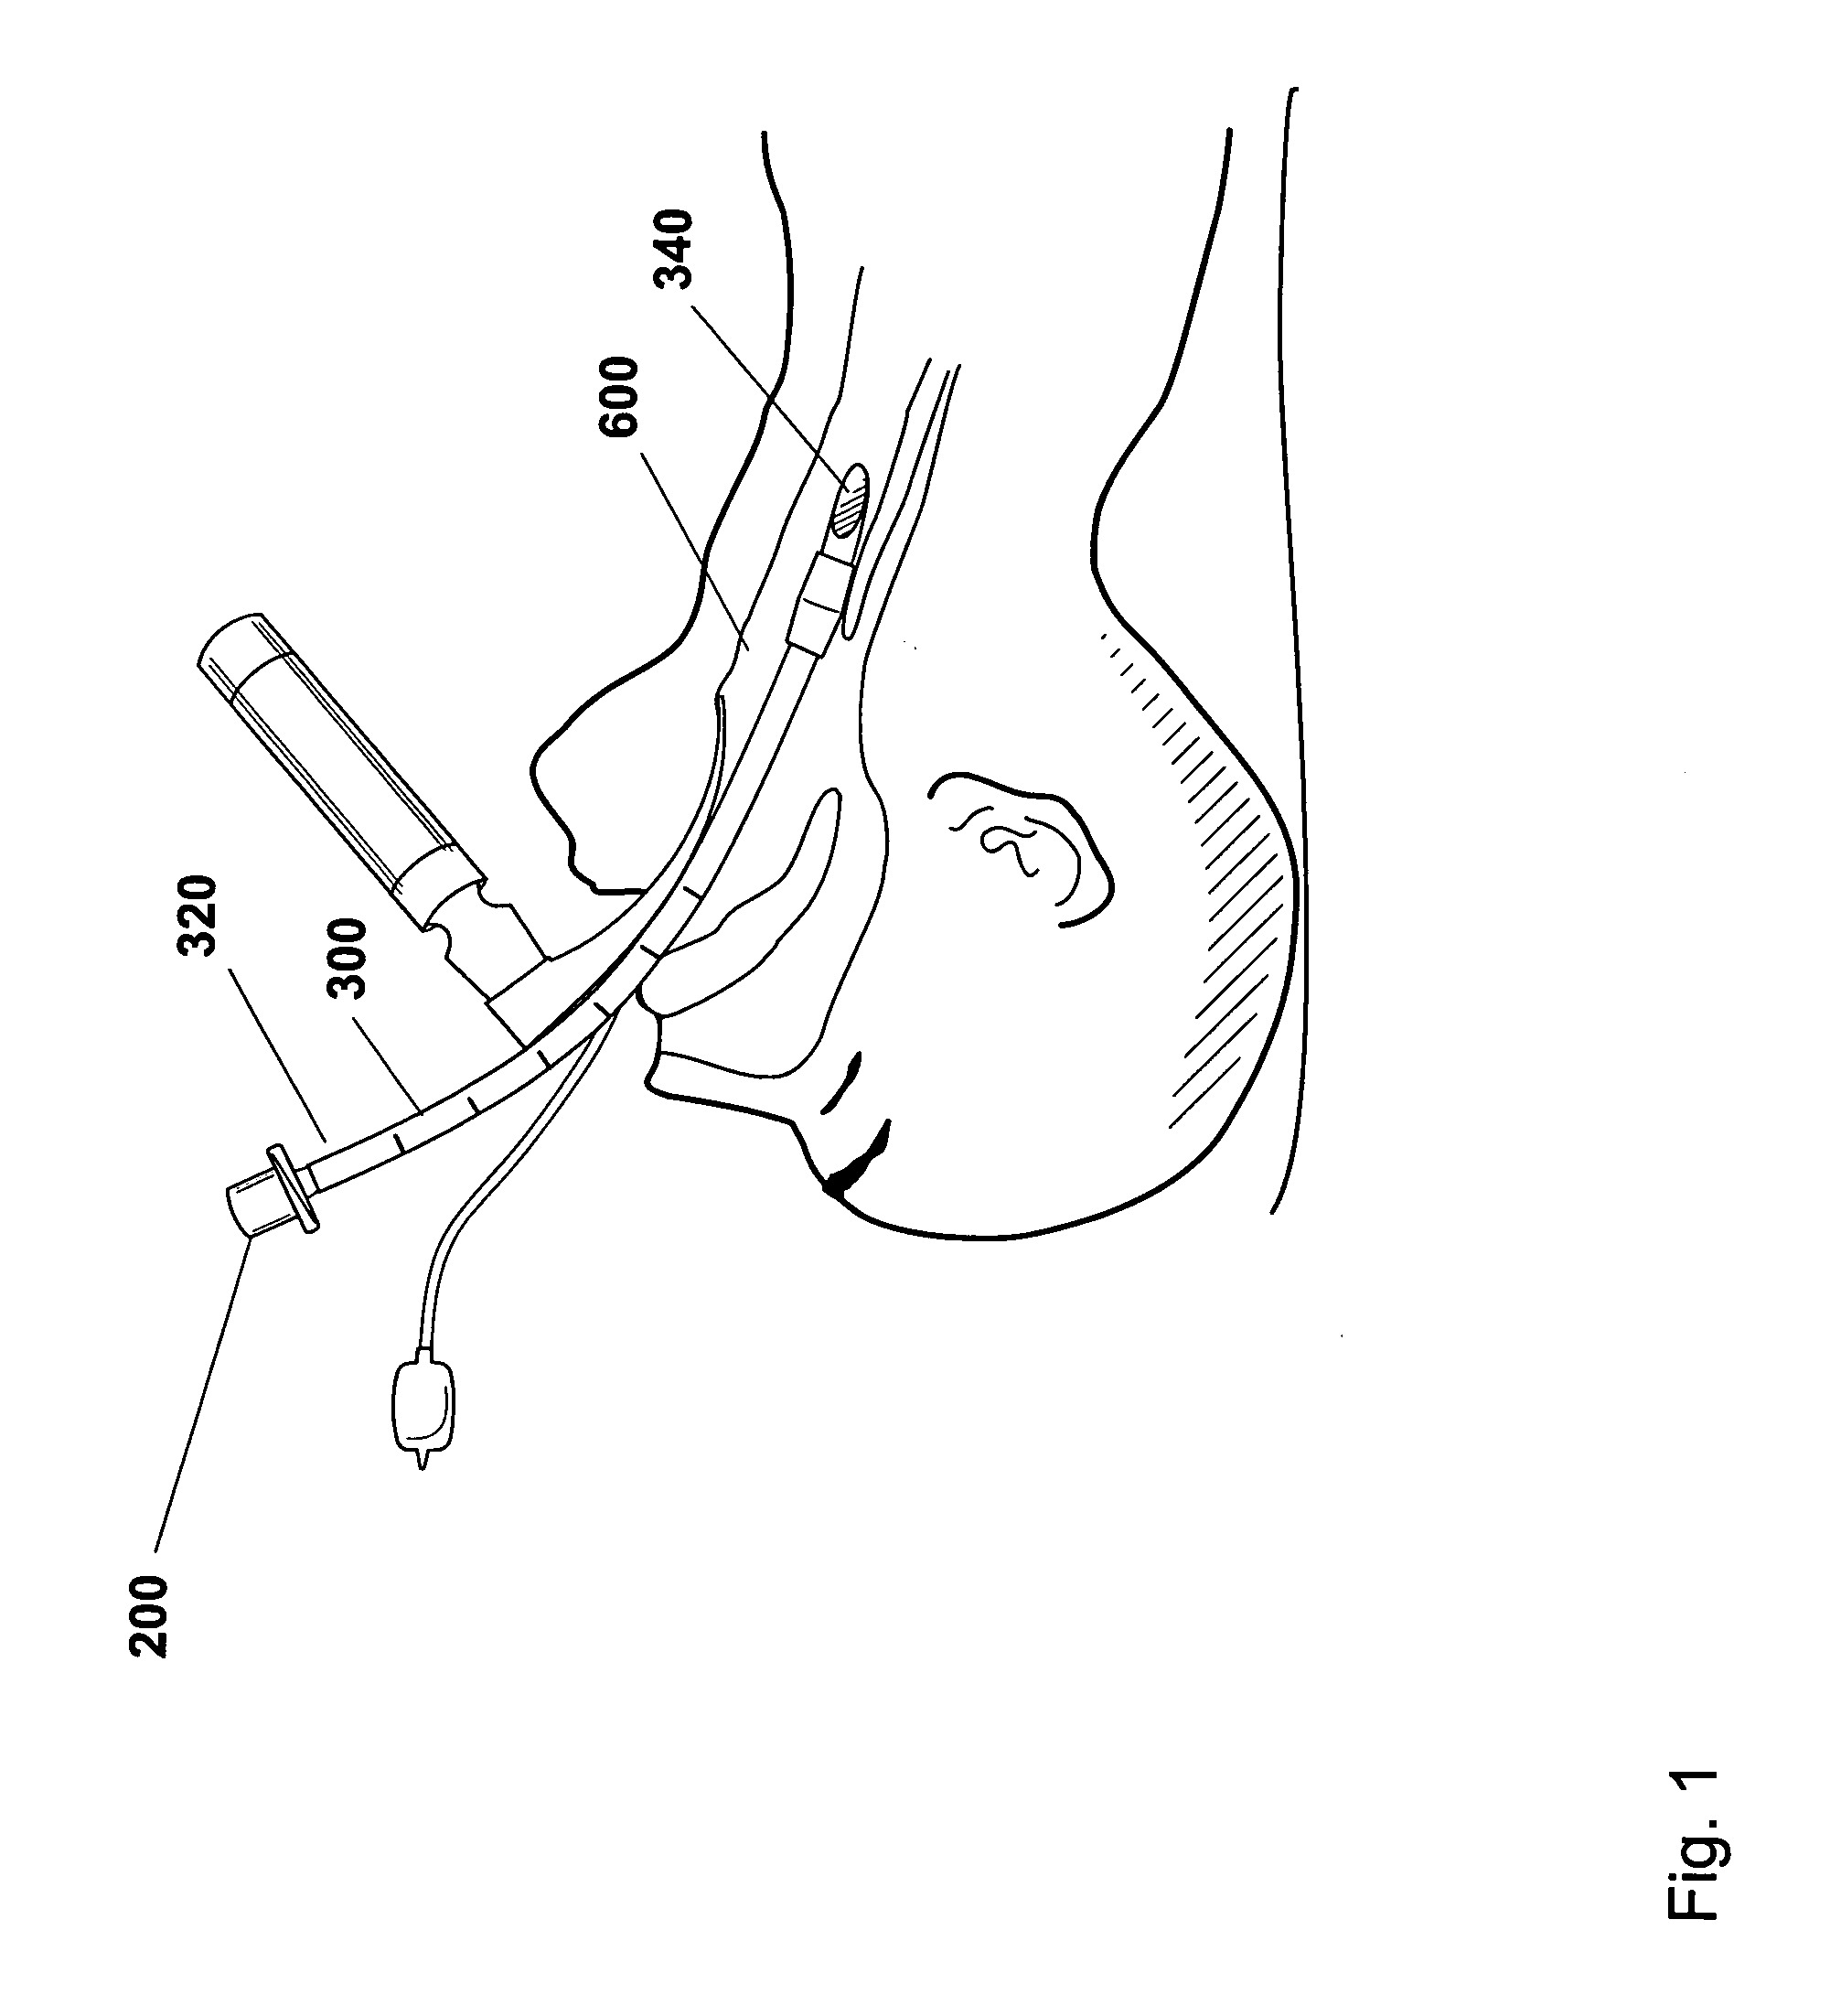 Endotracheal tube connector positioning system and method